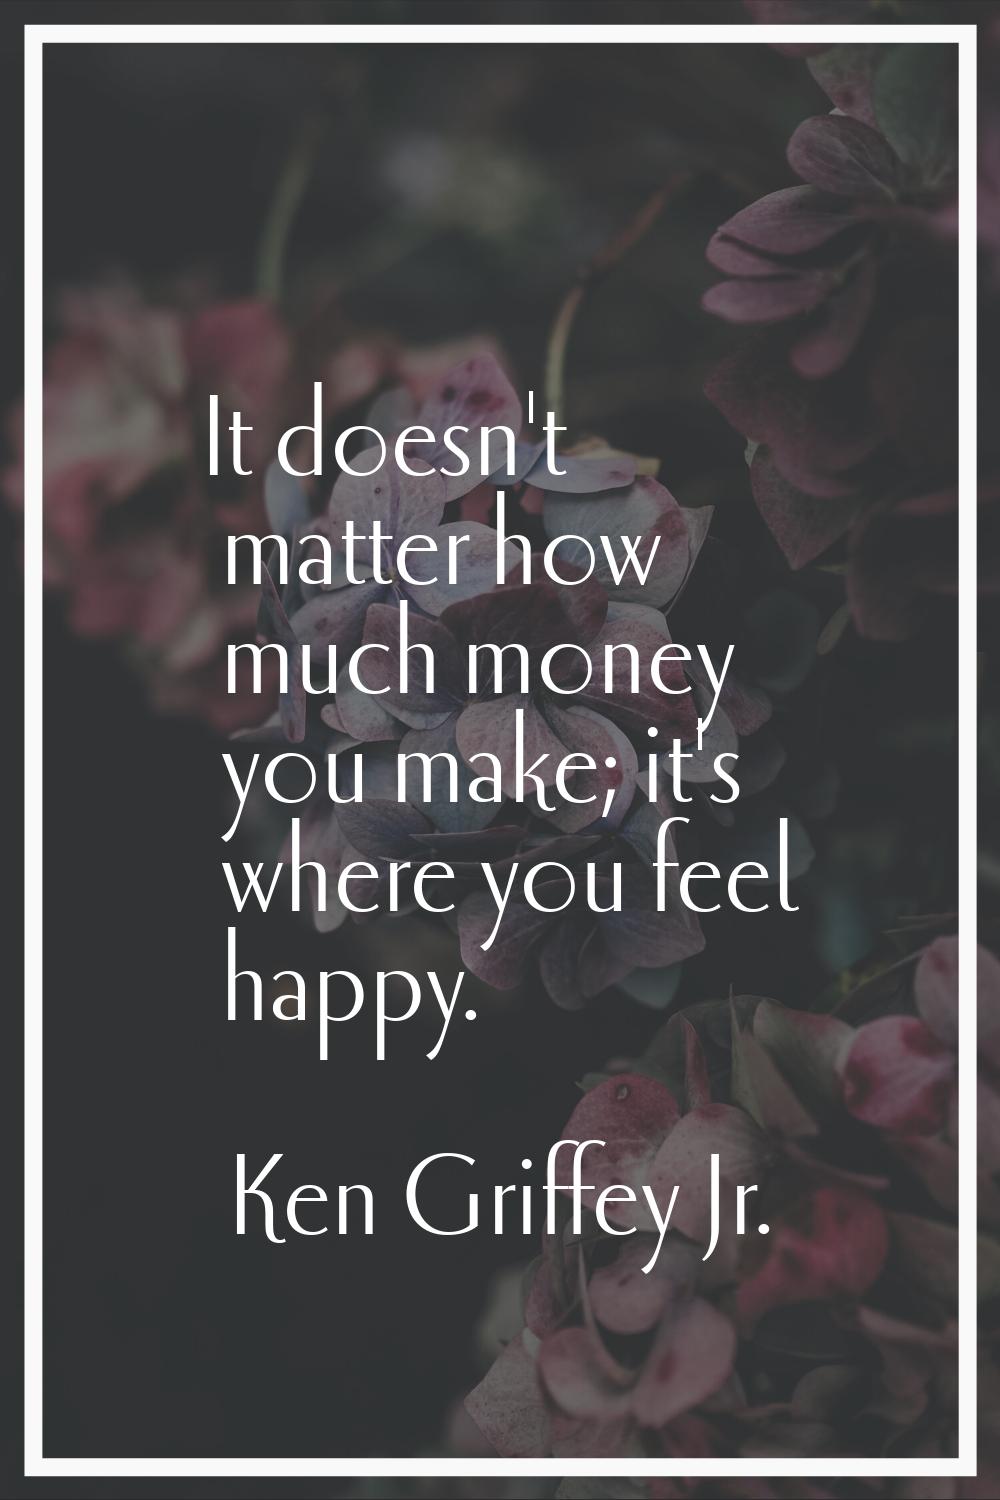 It doesn't matter how much money you make; it's where you feel happy.